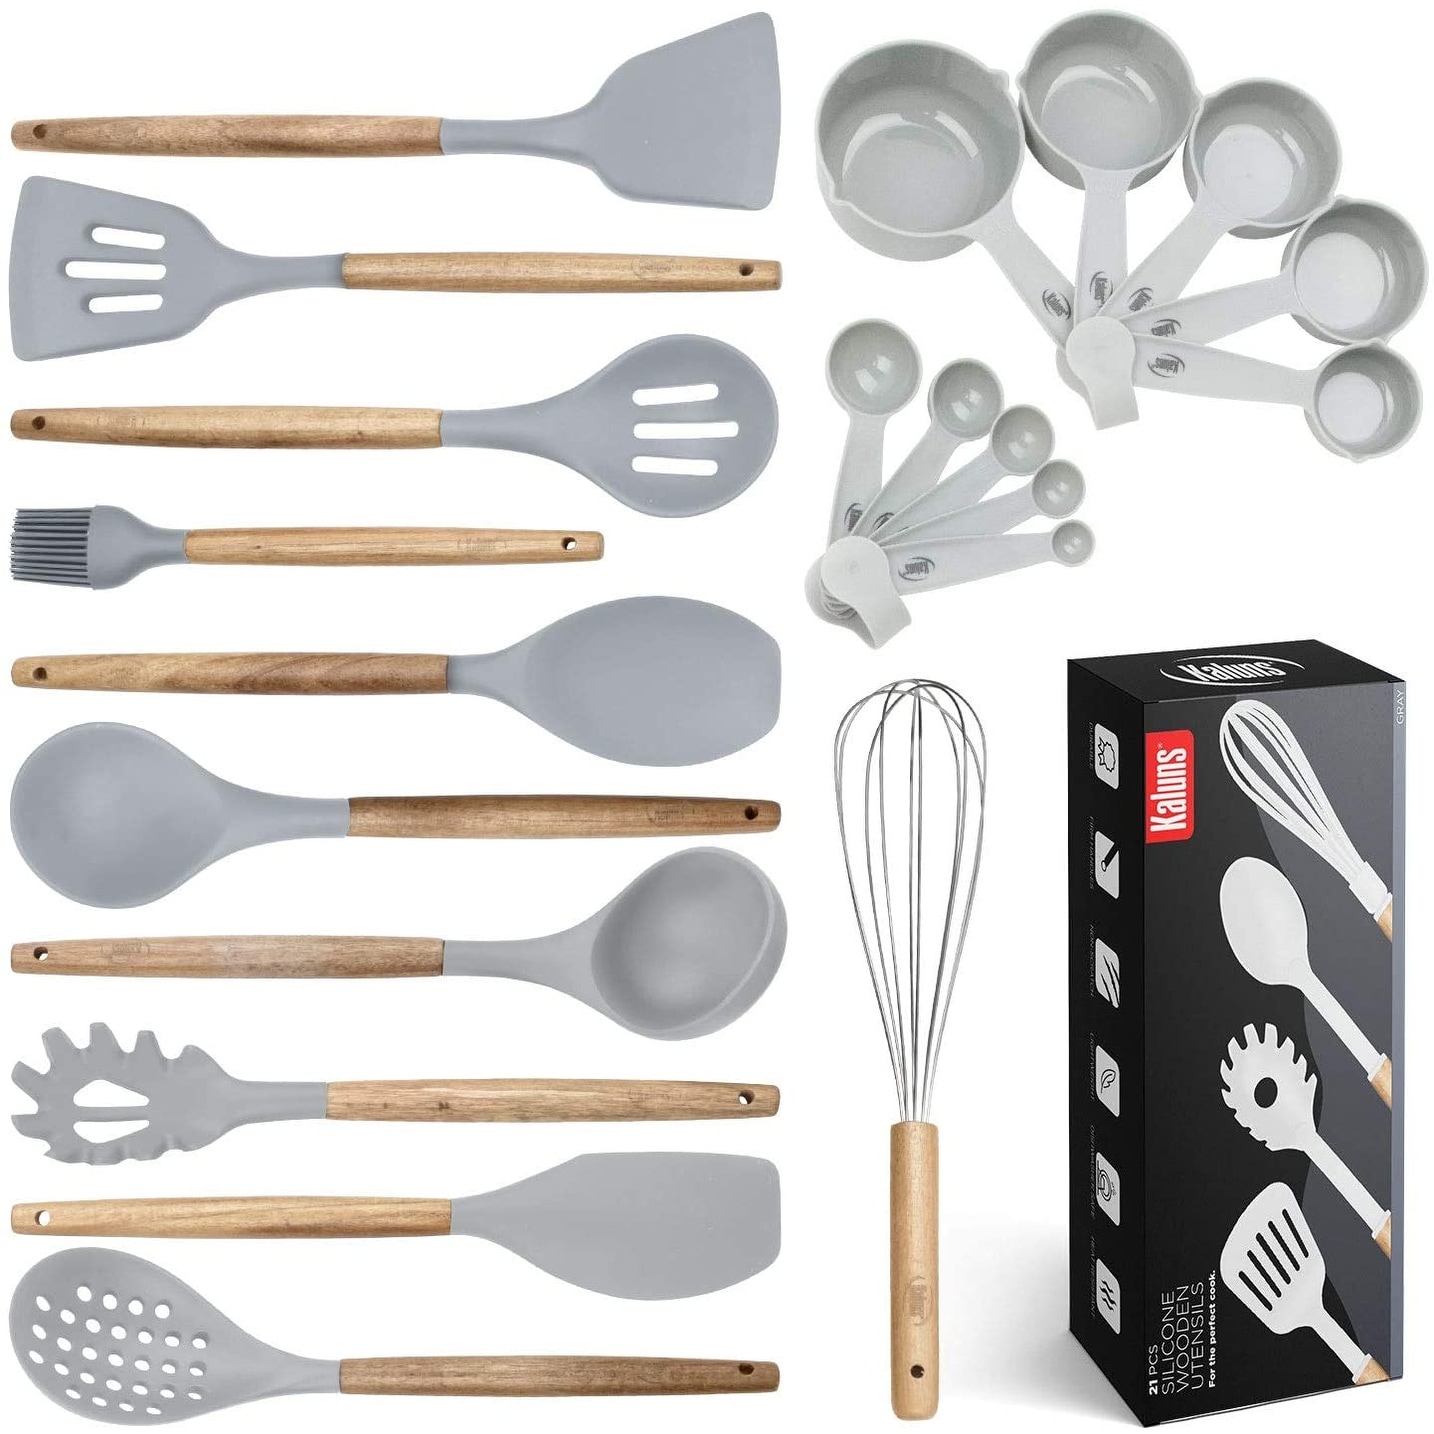 https://ak1.ostkcdn.com/images/products/is/images/direct/7f564b6f61e9b2bd0e3b21d27b3bc4151032fec3/Kitchen-Utensils-Set%2C-21-Wood-and-Silicone-Cooking-Utensil-Set.jpg